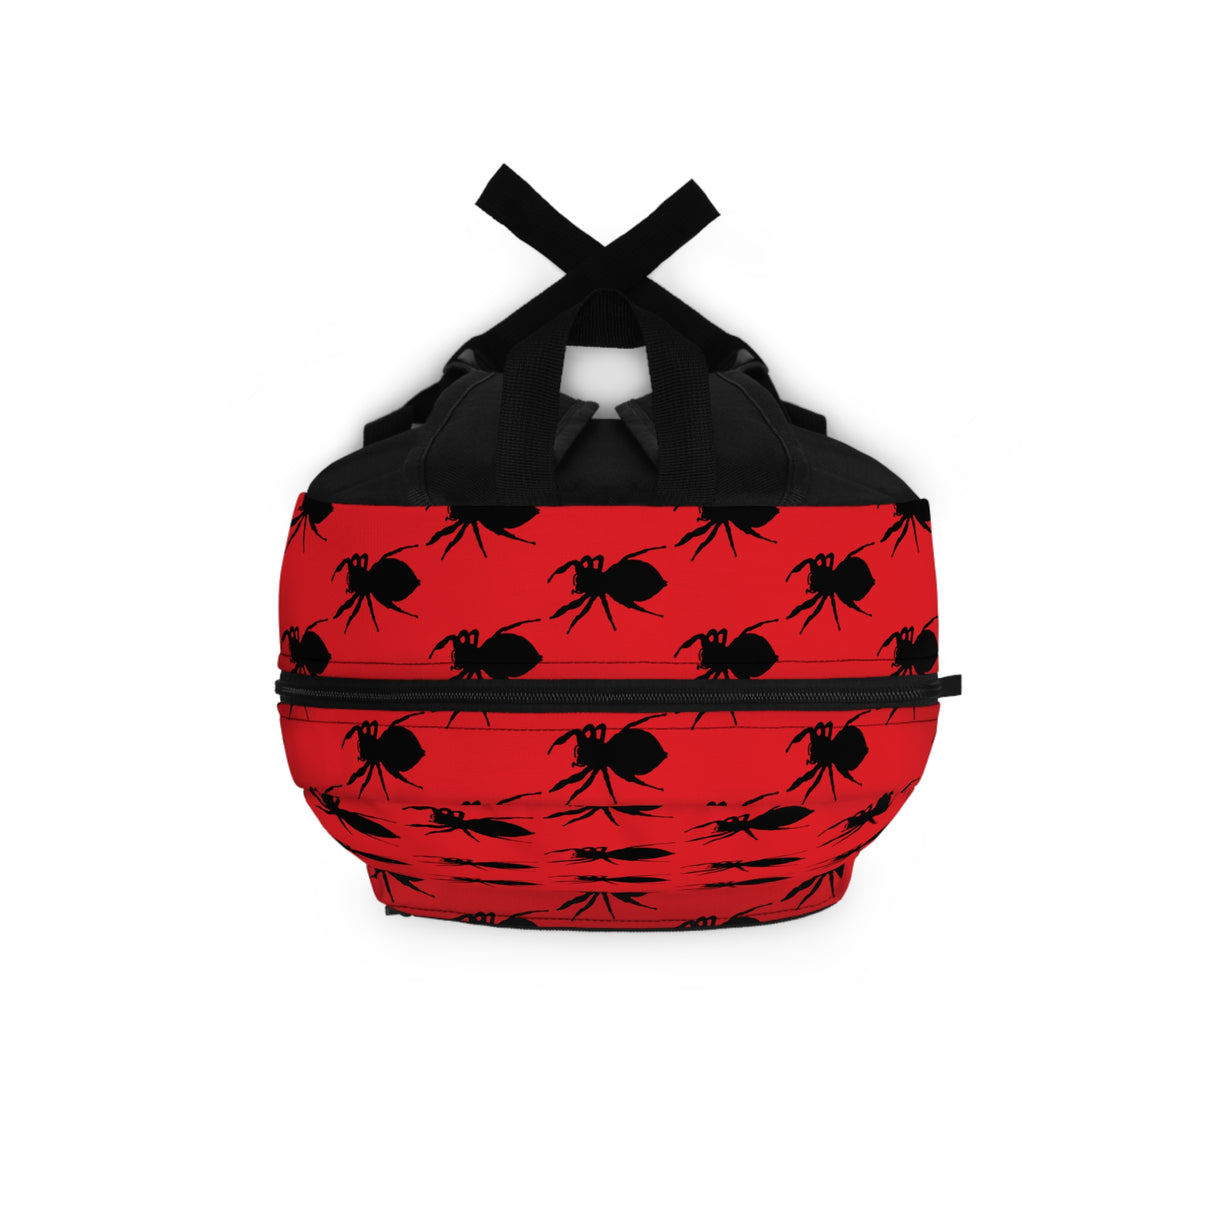 Jumping Spider Print Backpack Featuring on a Red Background Made in USA